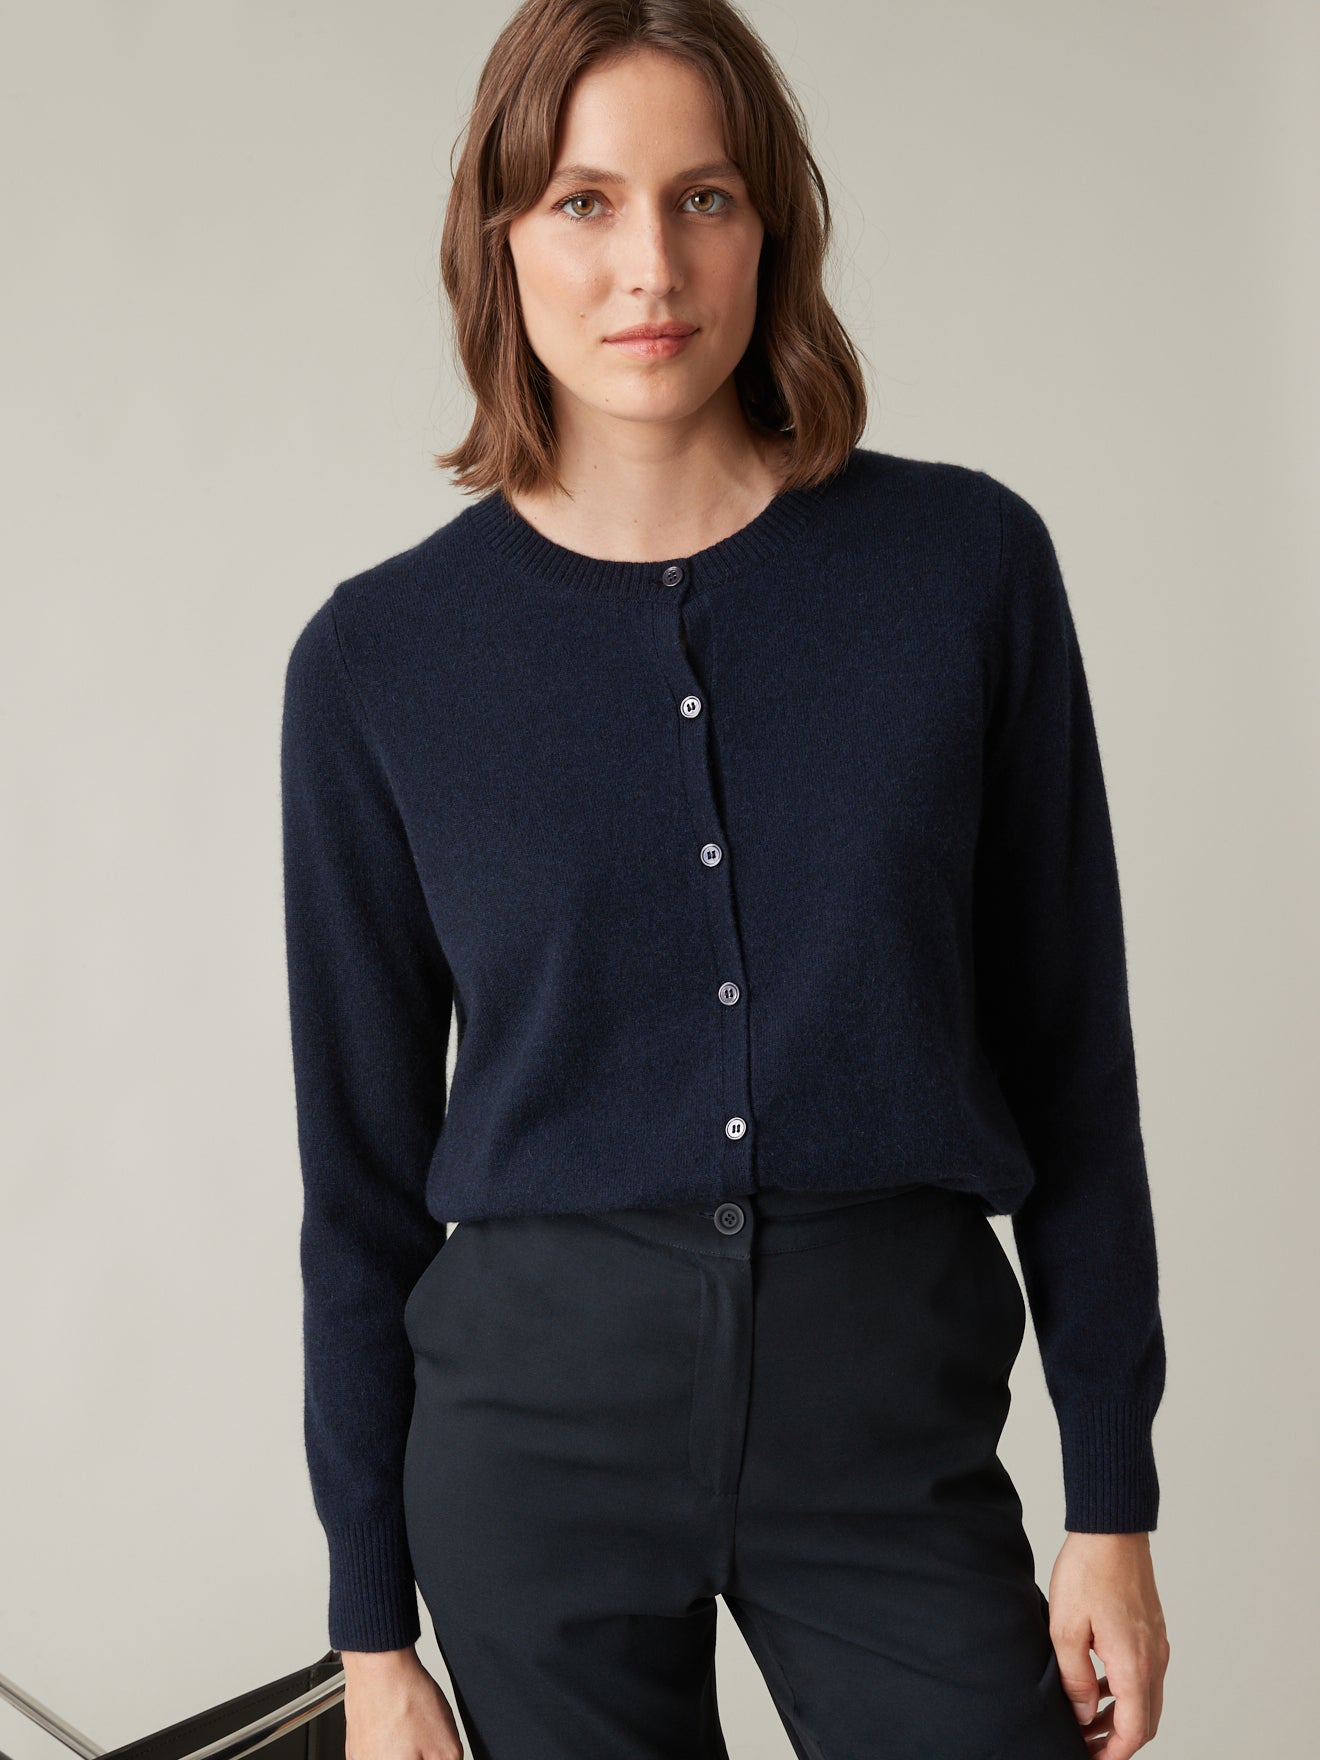 CYLZRCl Pull Femme, Pull Cachemire for Femme, Pull Col Roulé 100